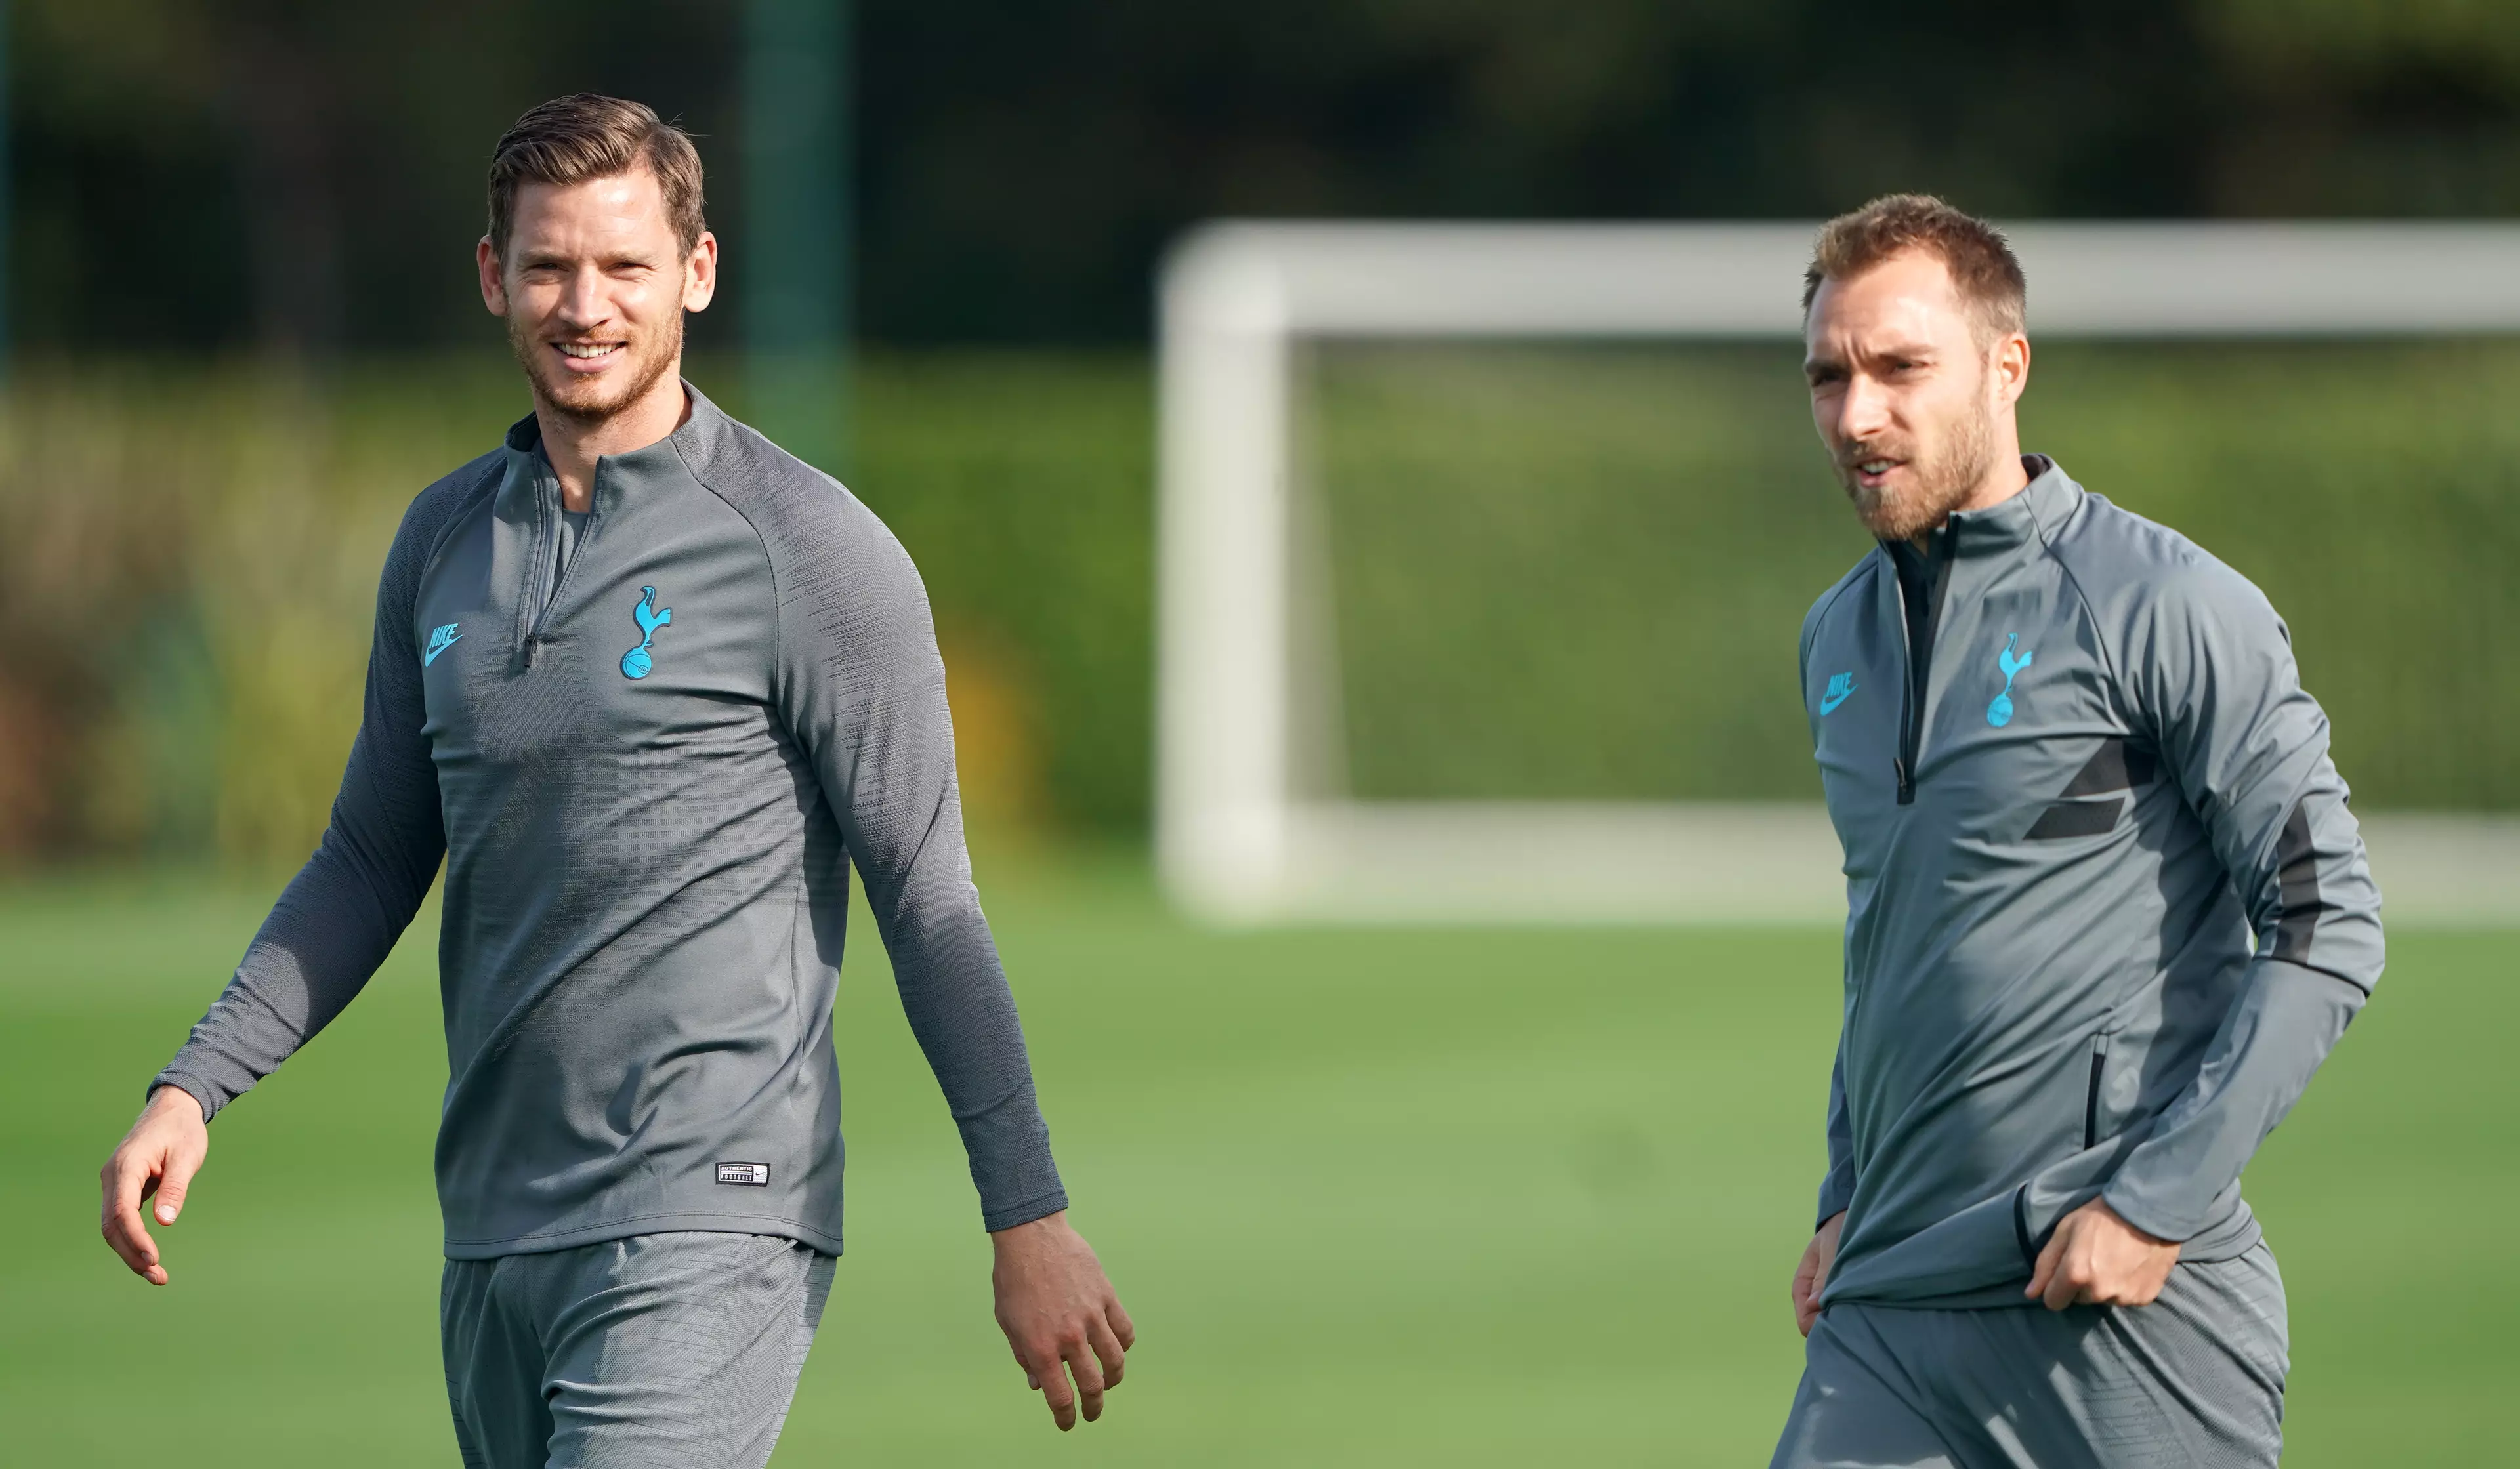 Vertonghen, left, could soon join Christian Eriksen out the door at Spurs. Image: PA Images